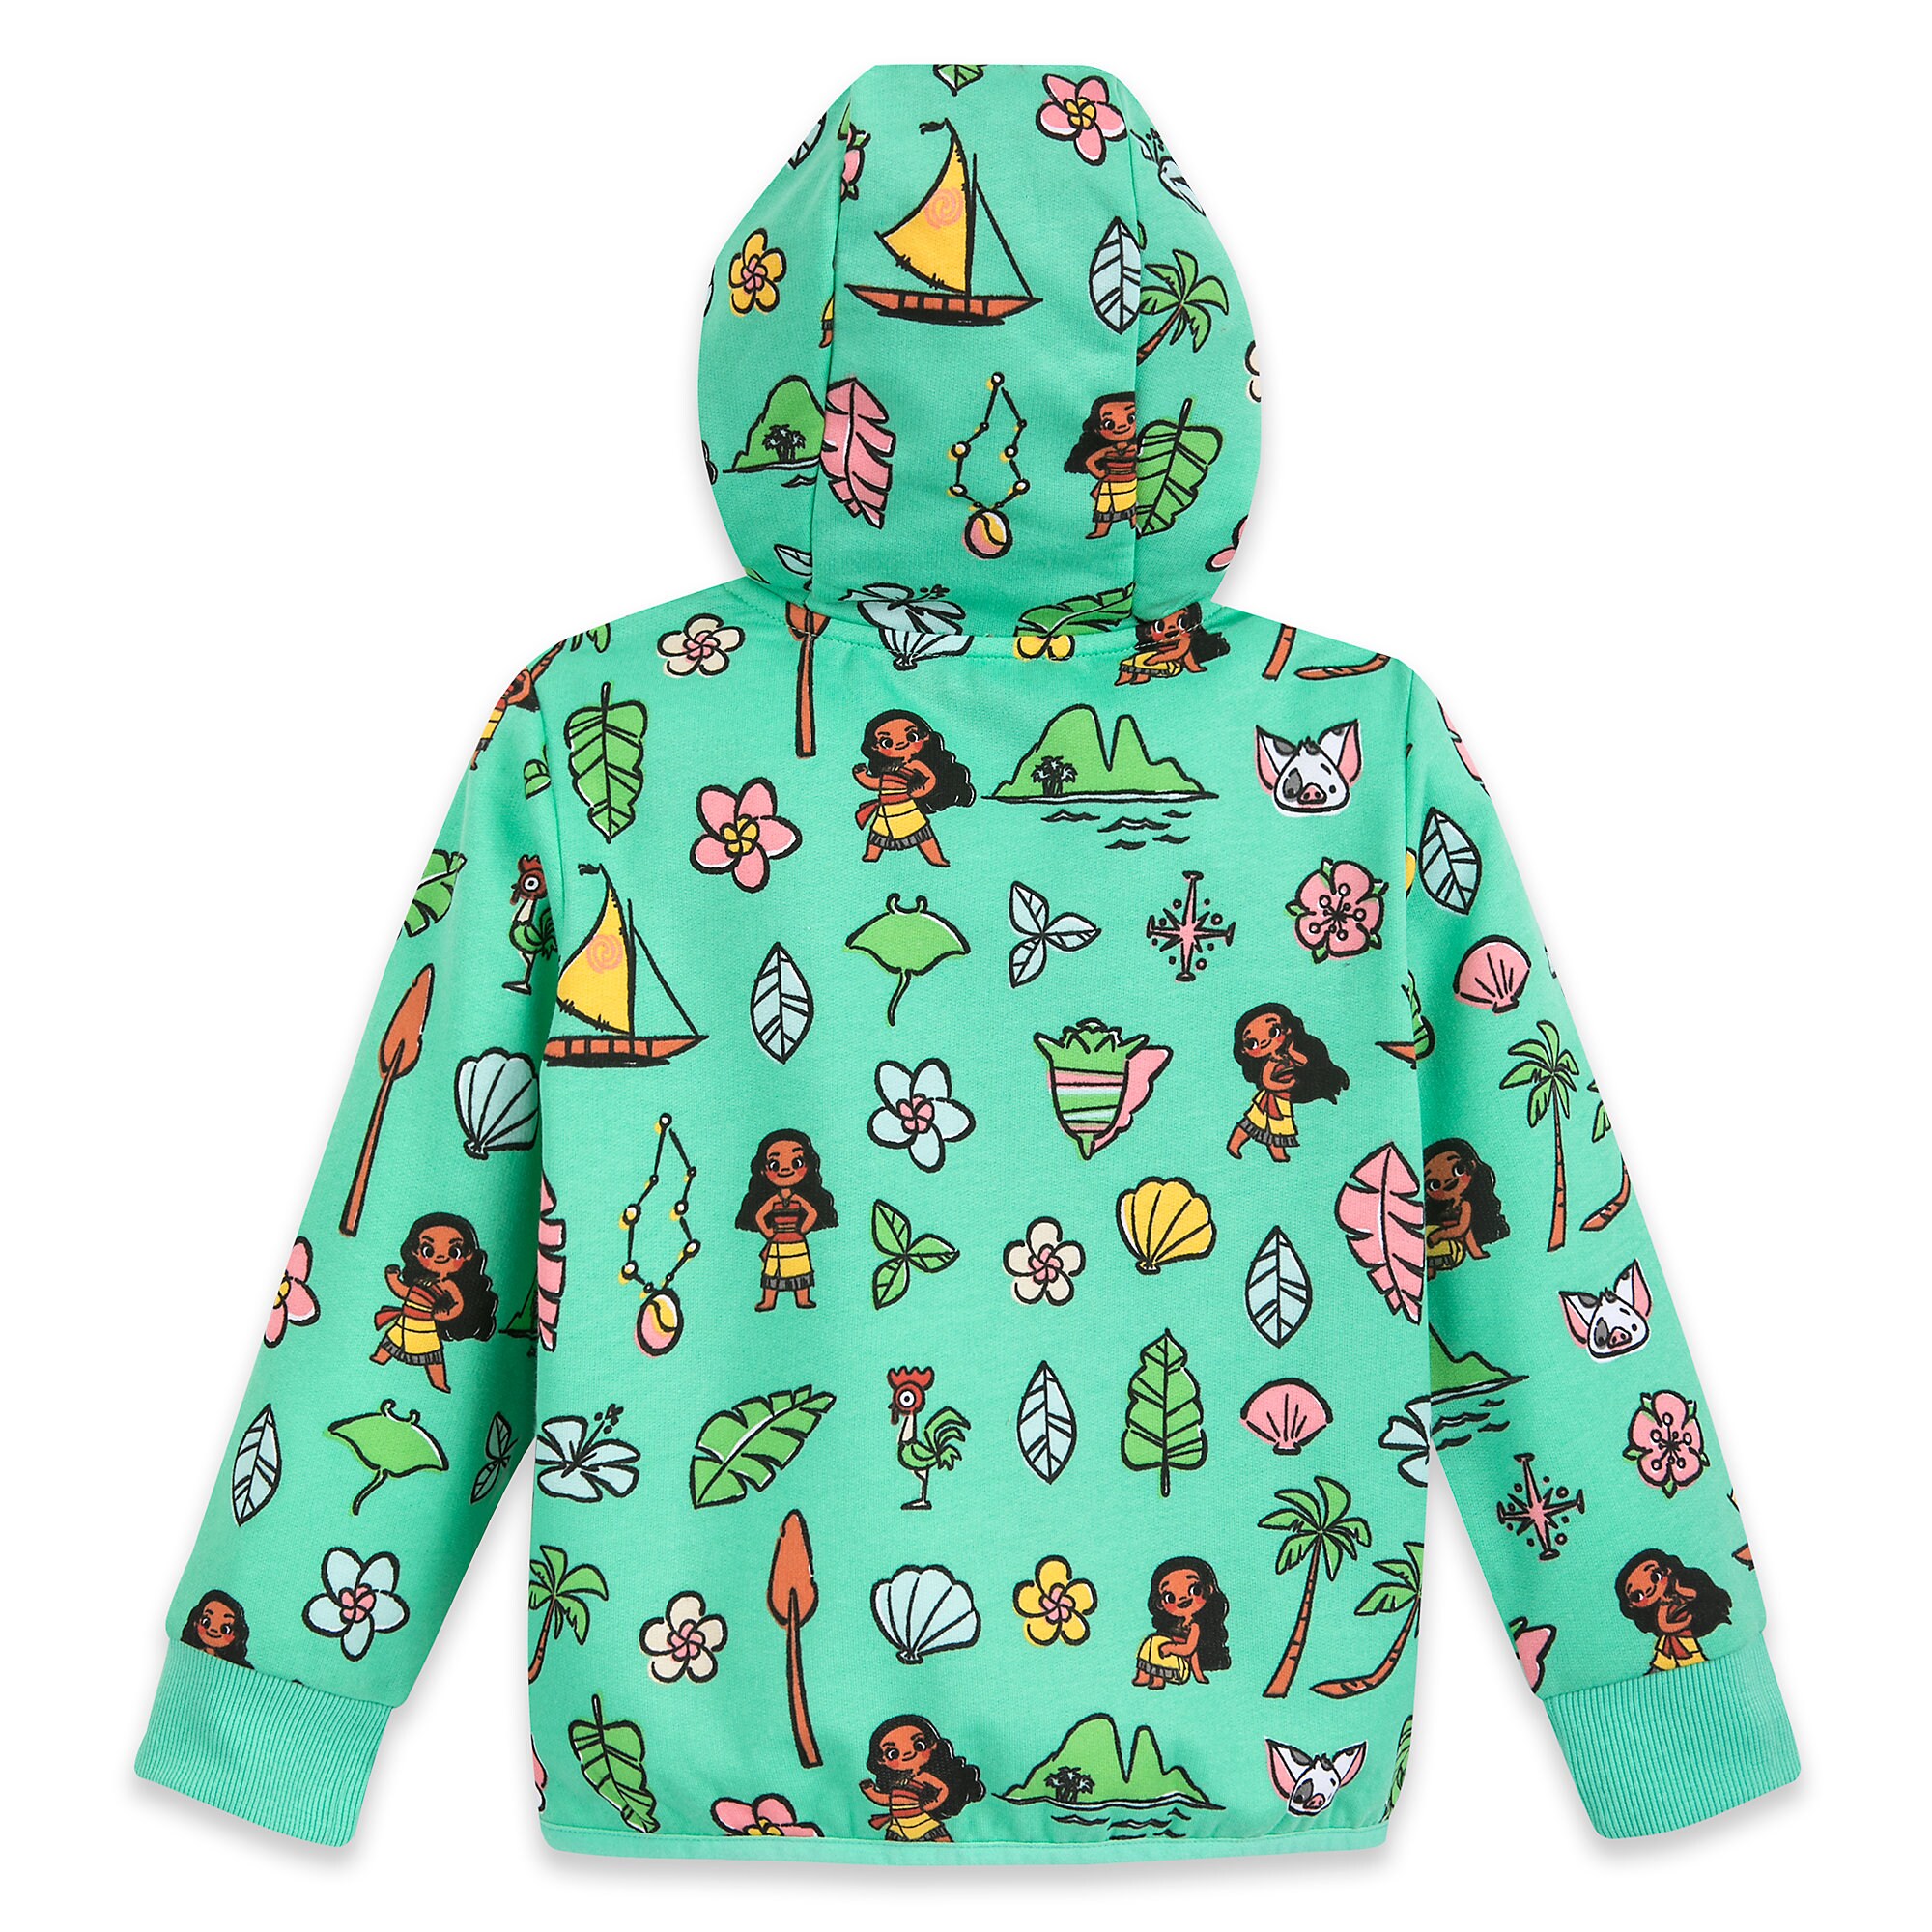 Moana Zip-Up Hoodie for Kids - Personalized